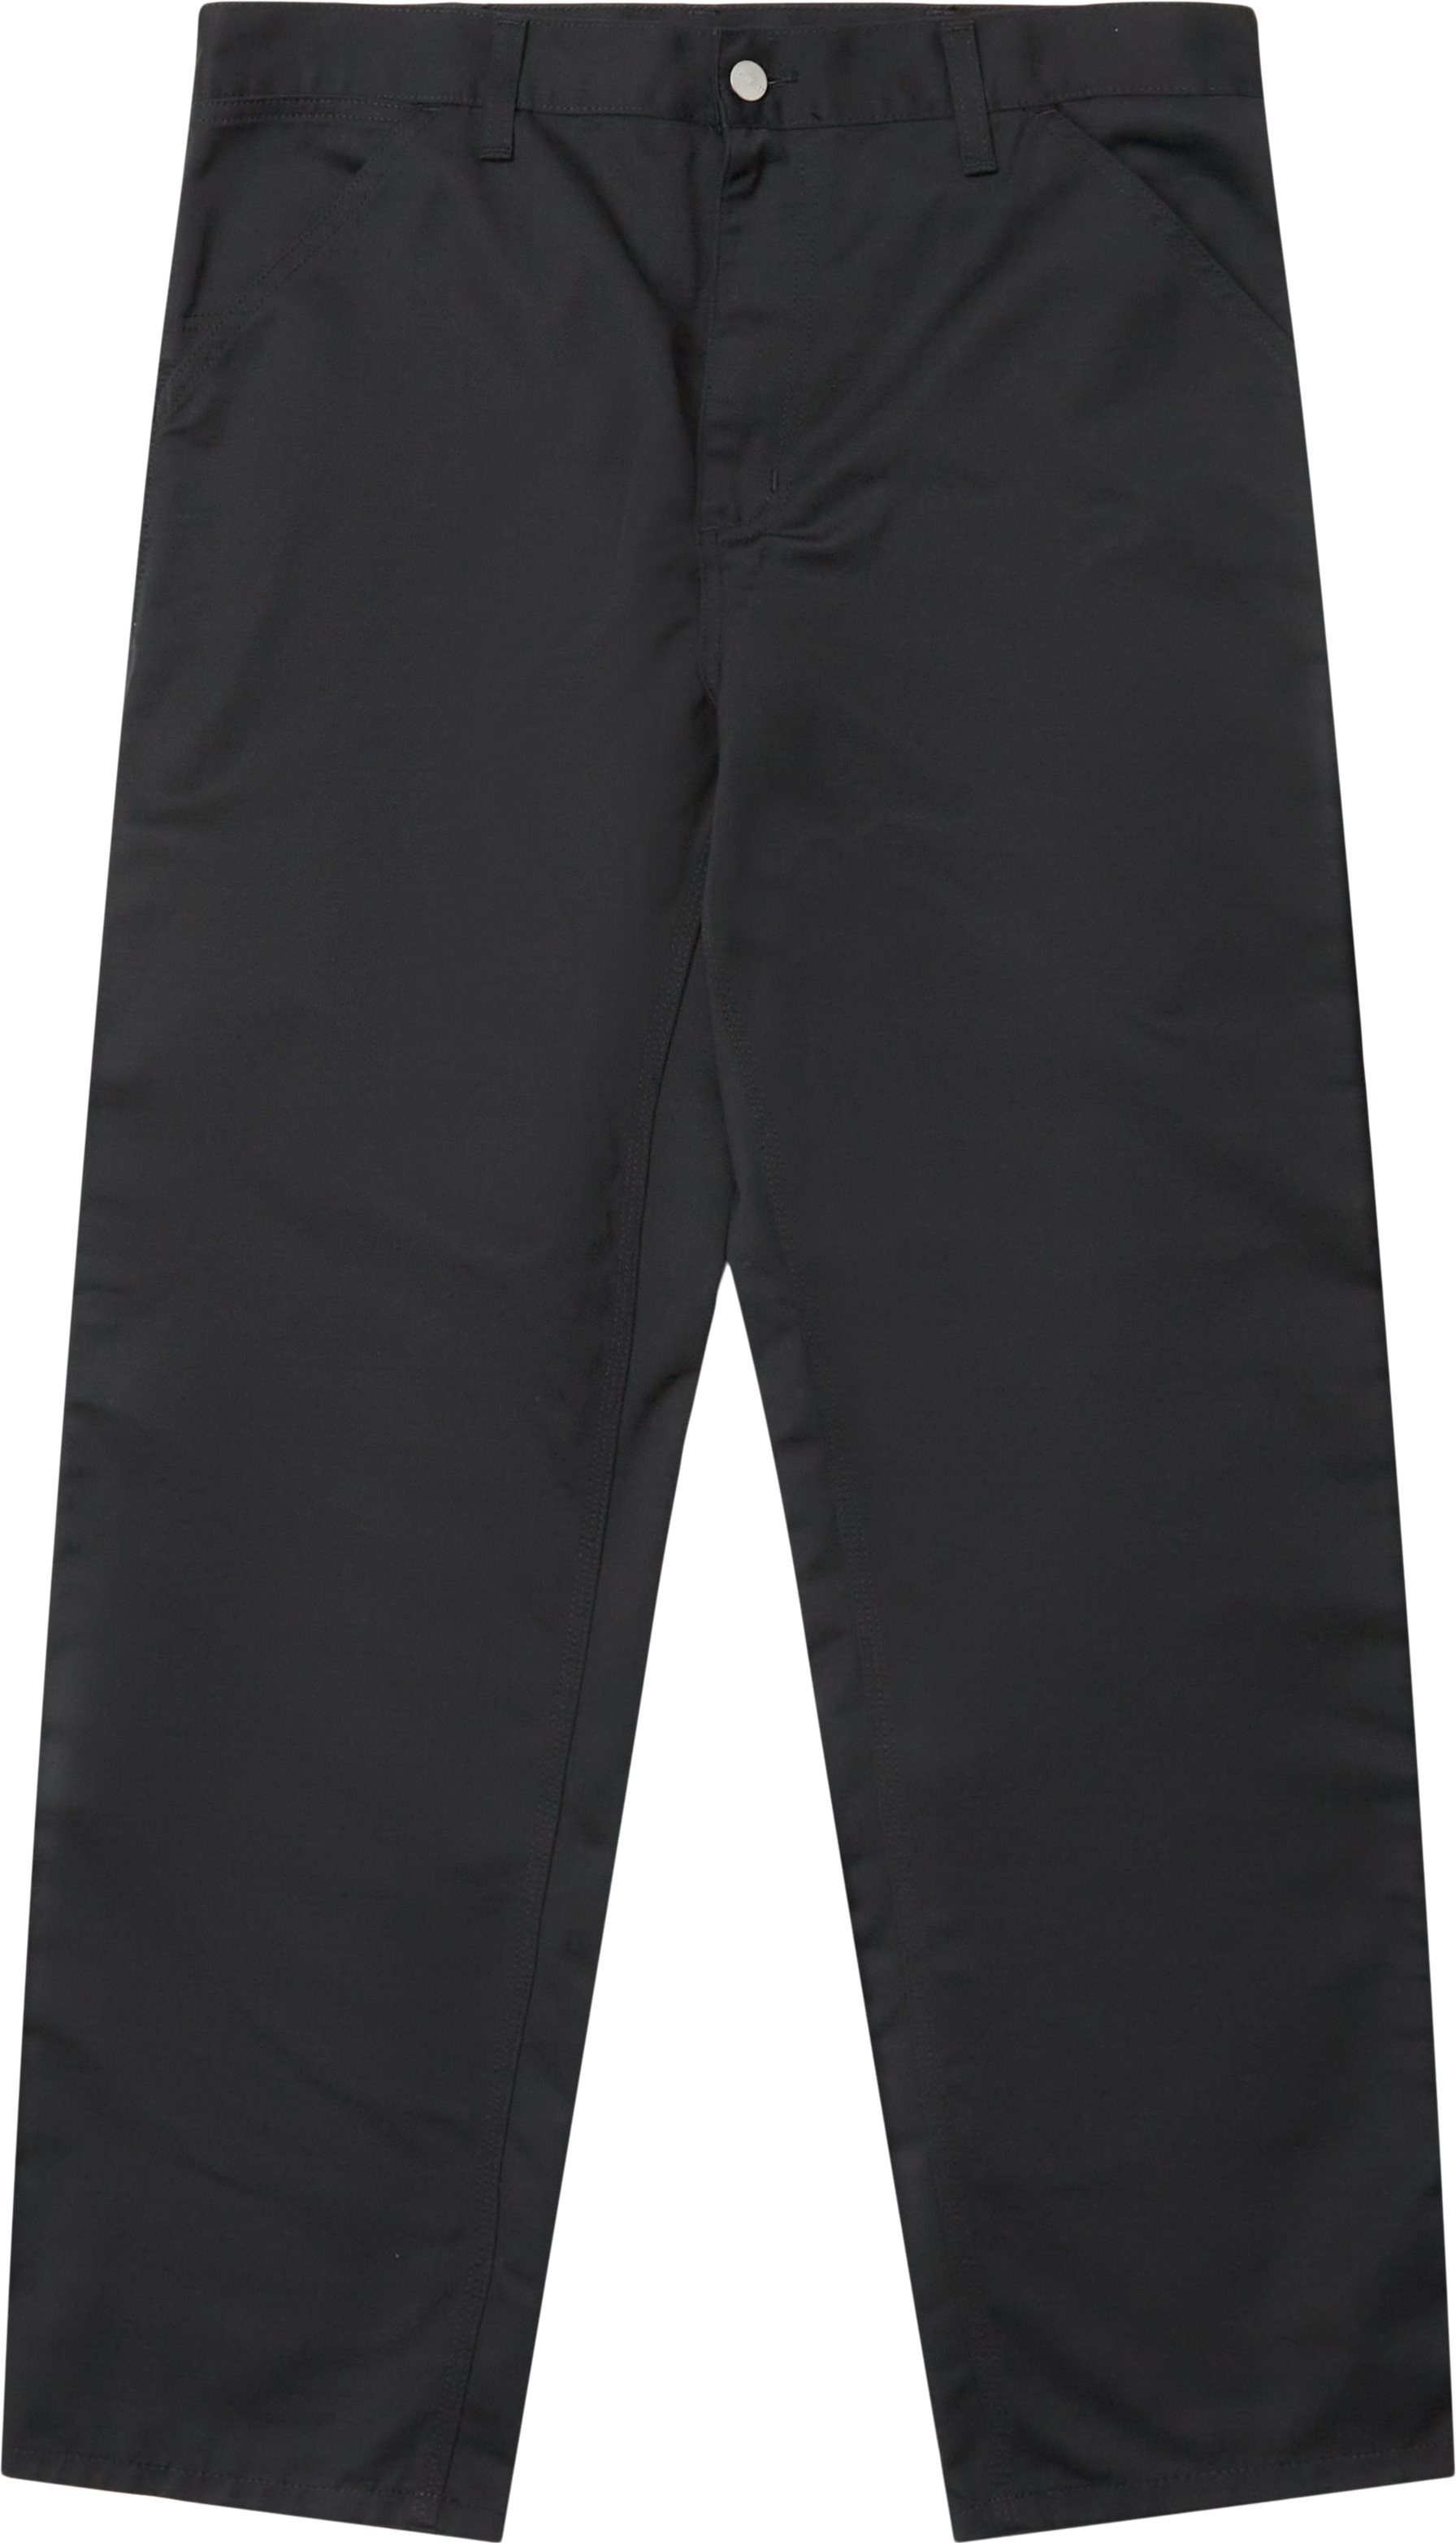 Simple Pant - Trousers - Straight fit - Black